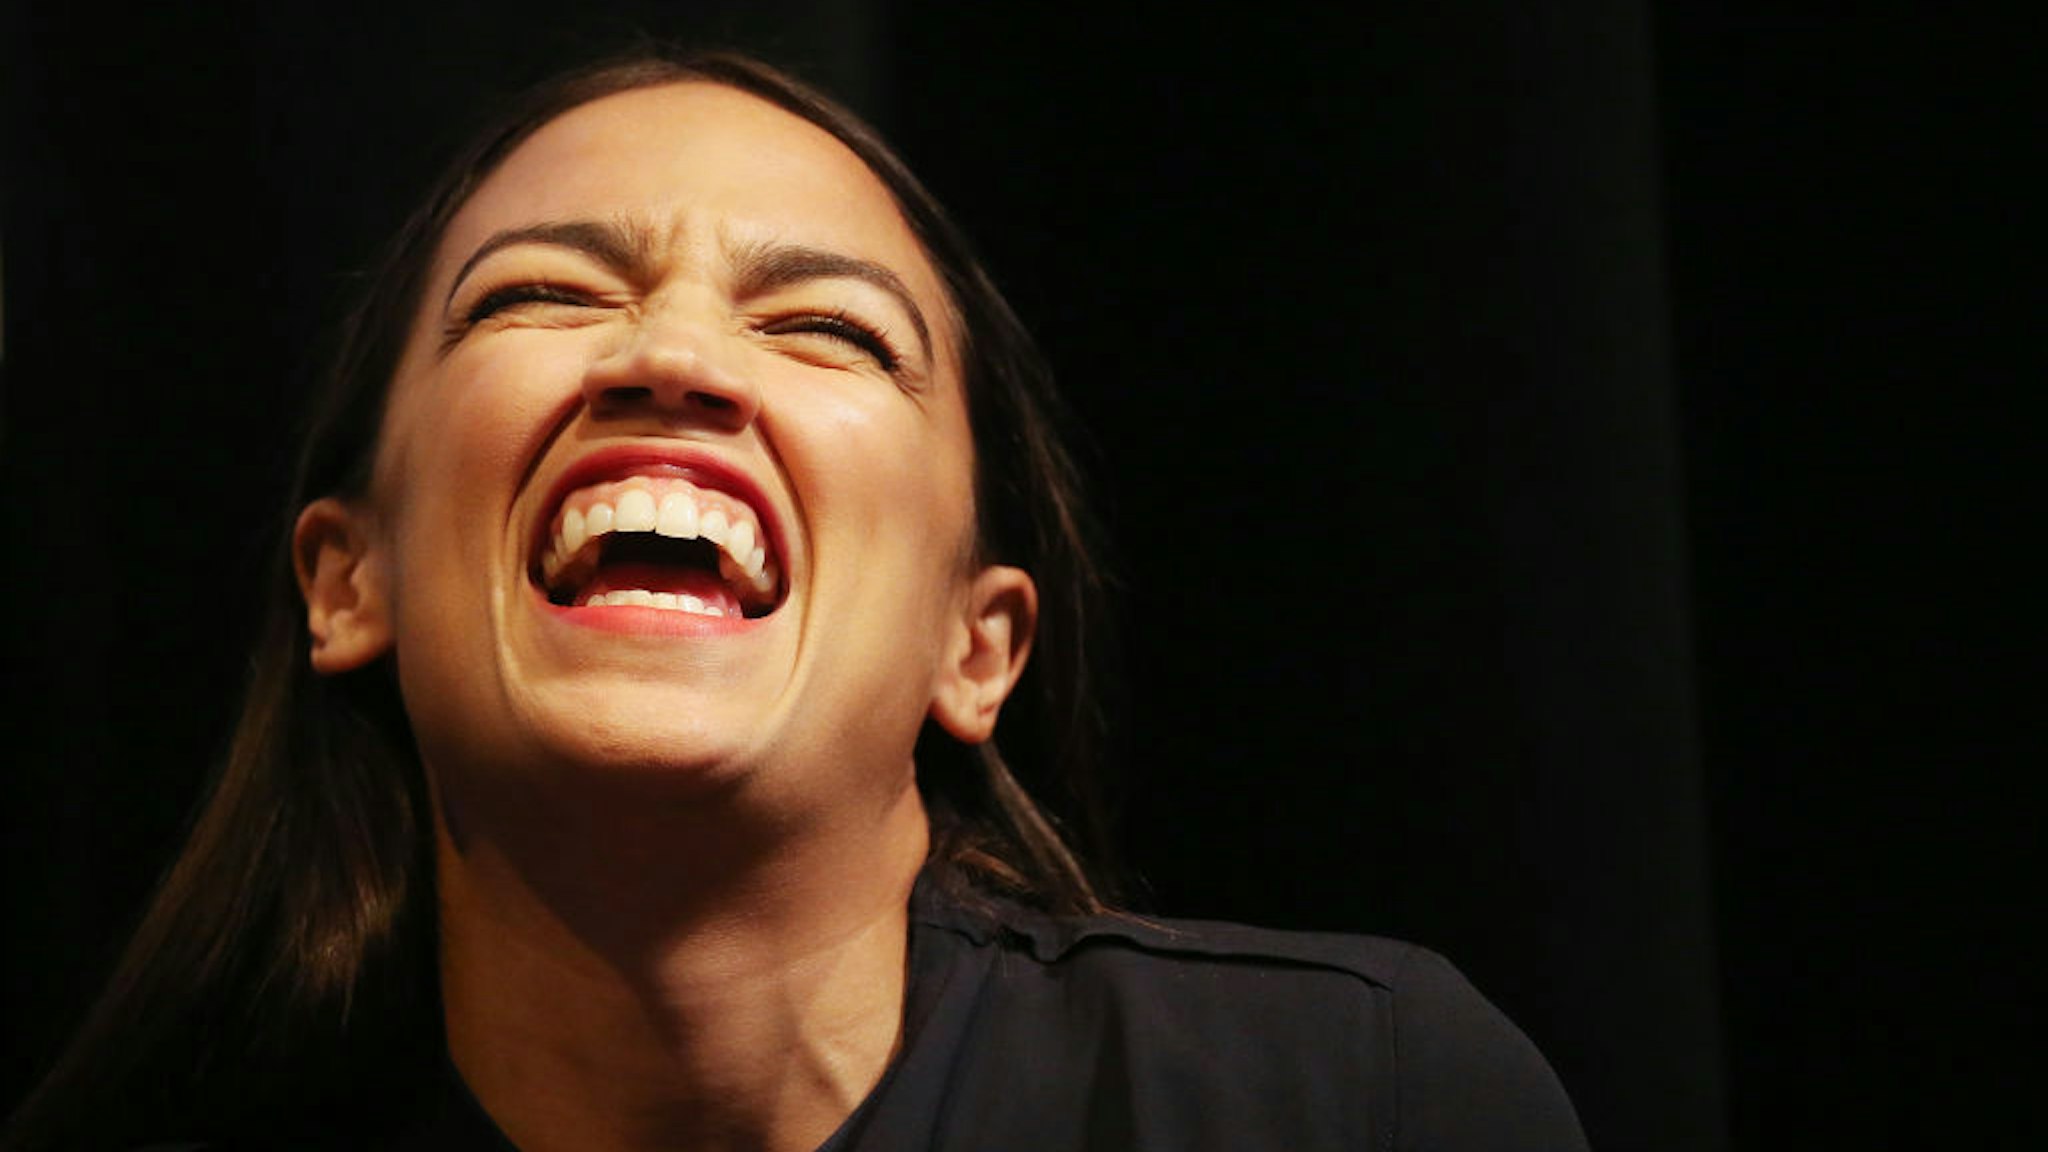 New York U.S. House candidate Alexandria Ocasio-Cortez laughs at a progressive fundraiser on August 2, 2018 in Los Angeles, California.